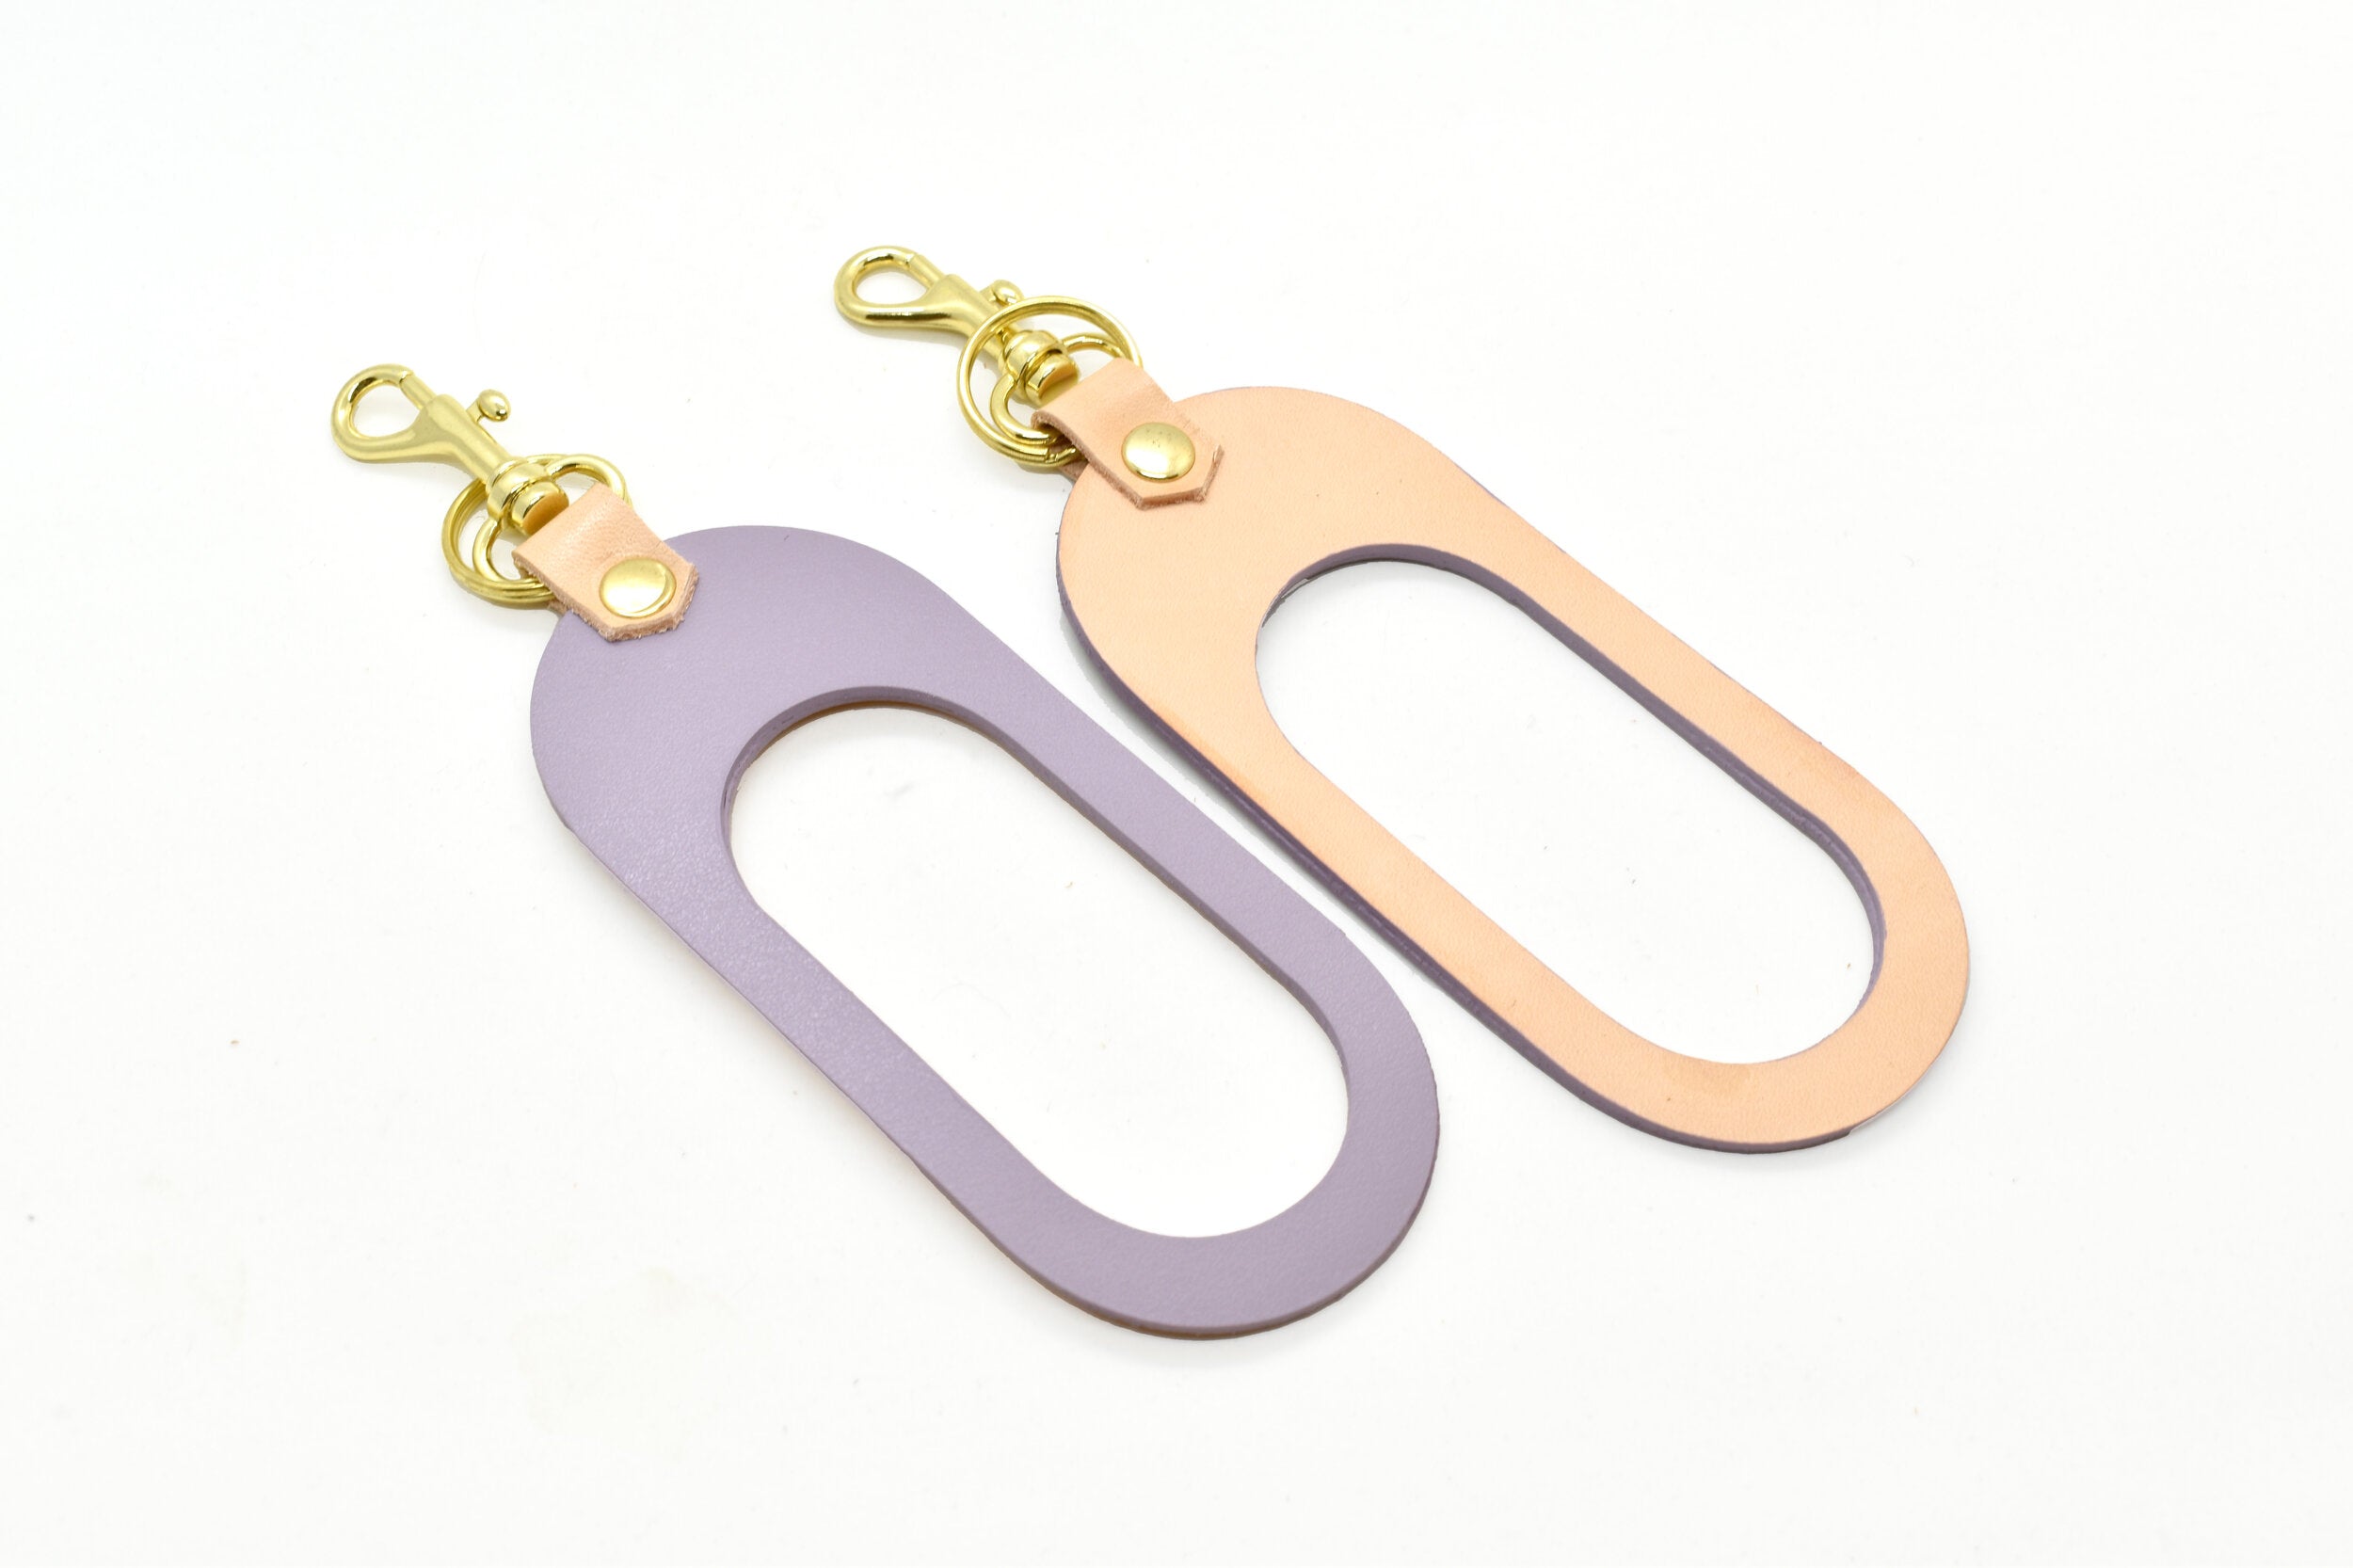 A dual-sided leather multicolor keychain in veg tan leather and matte pastel purple leather.